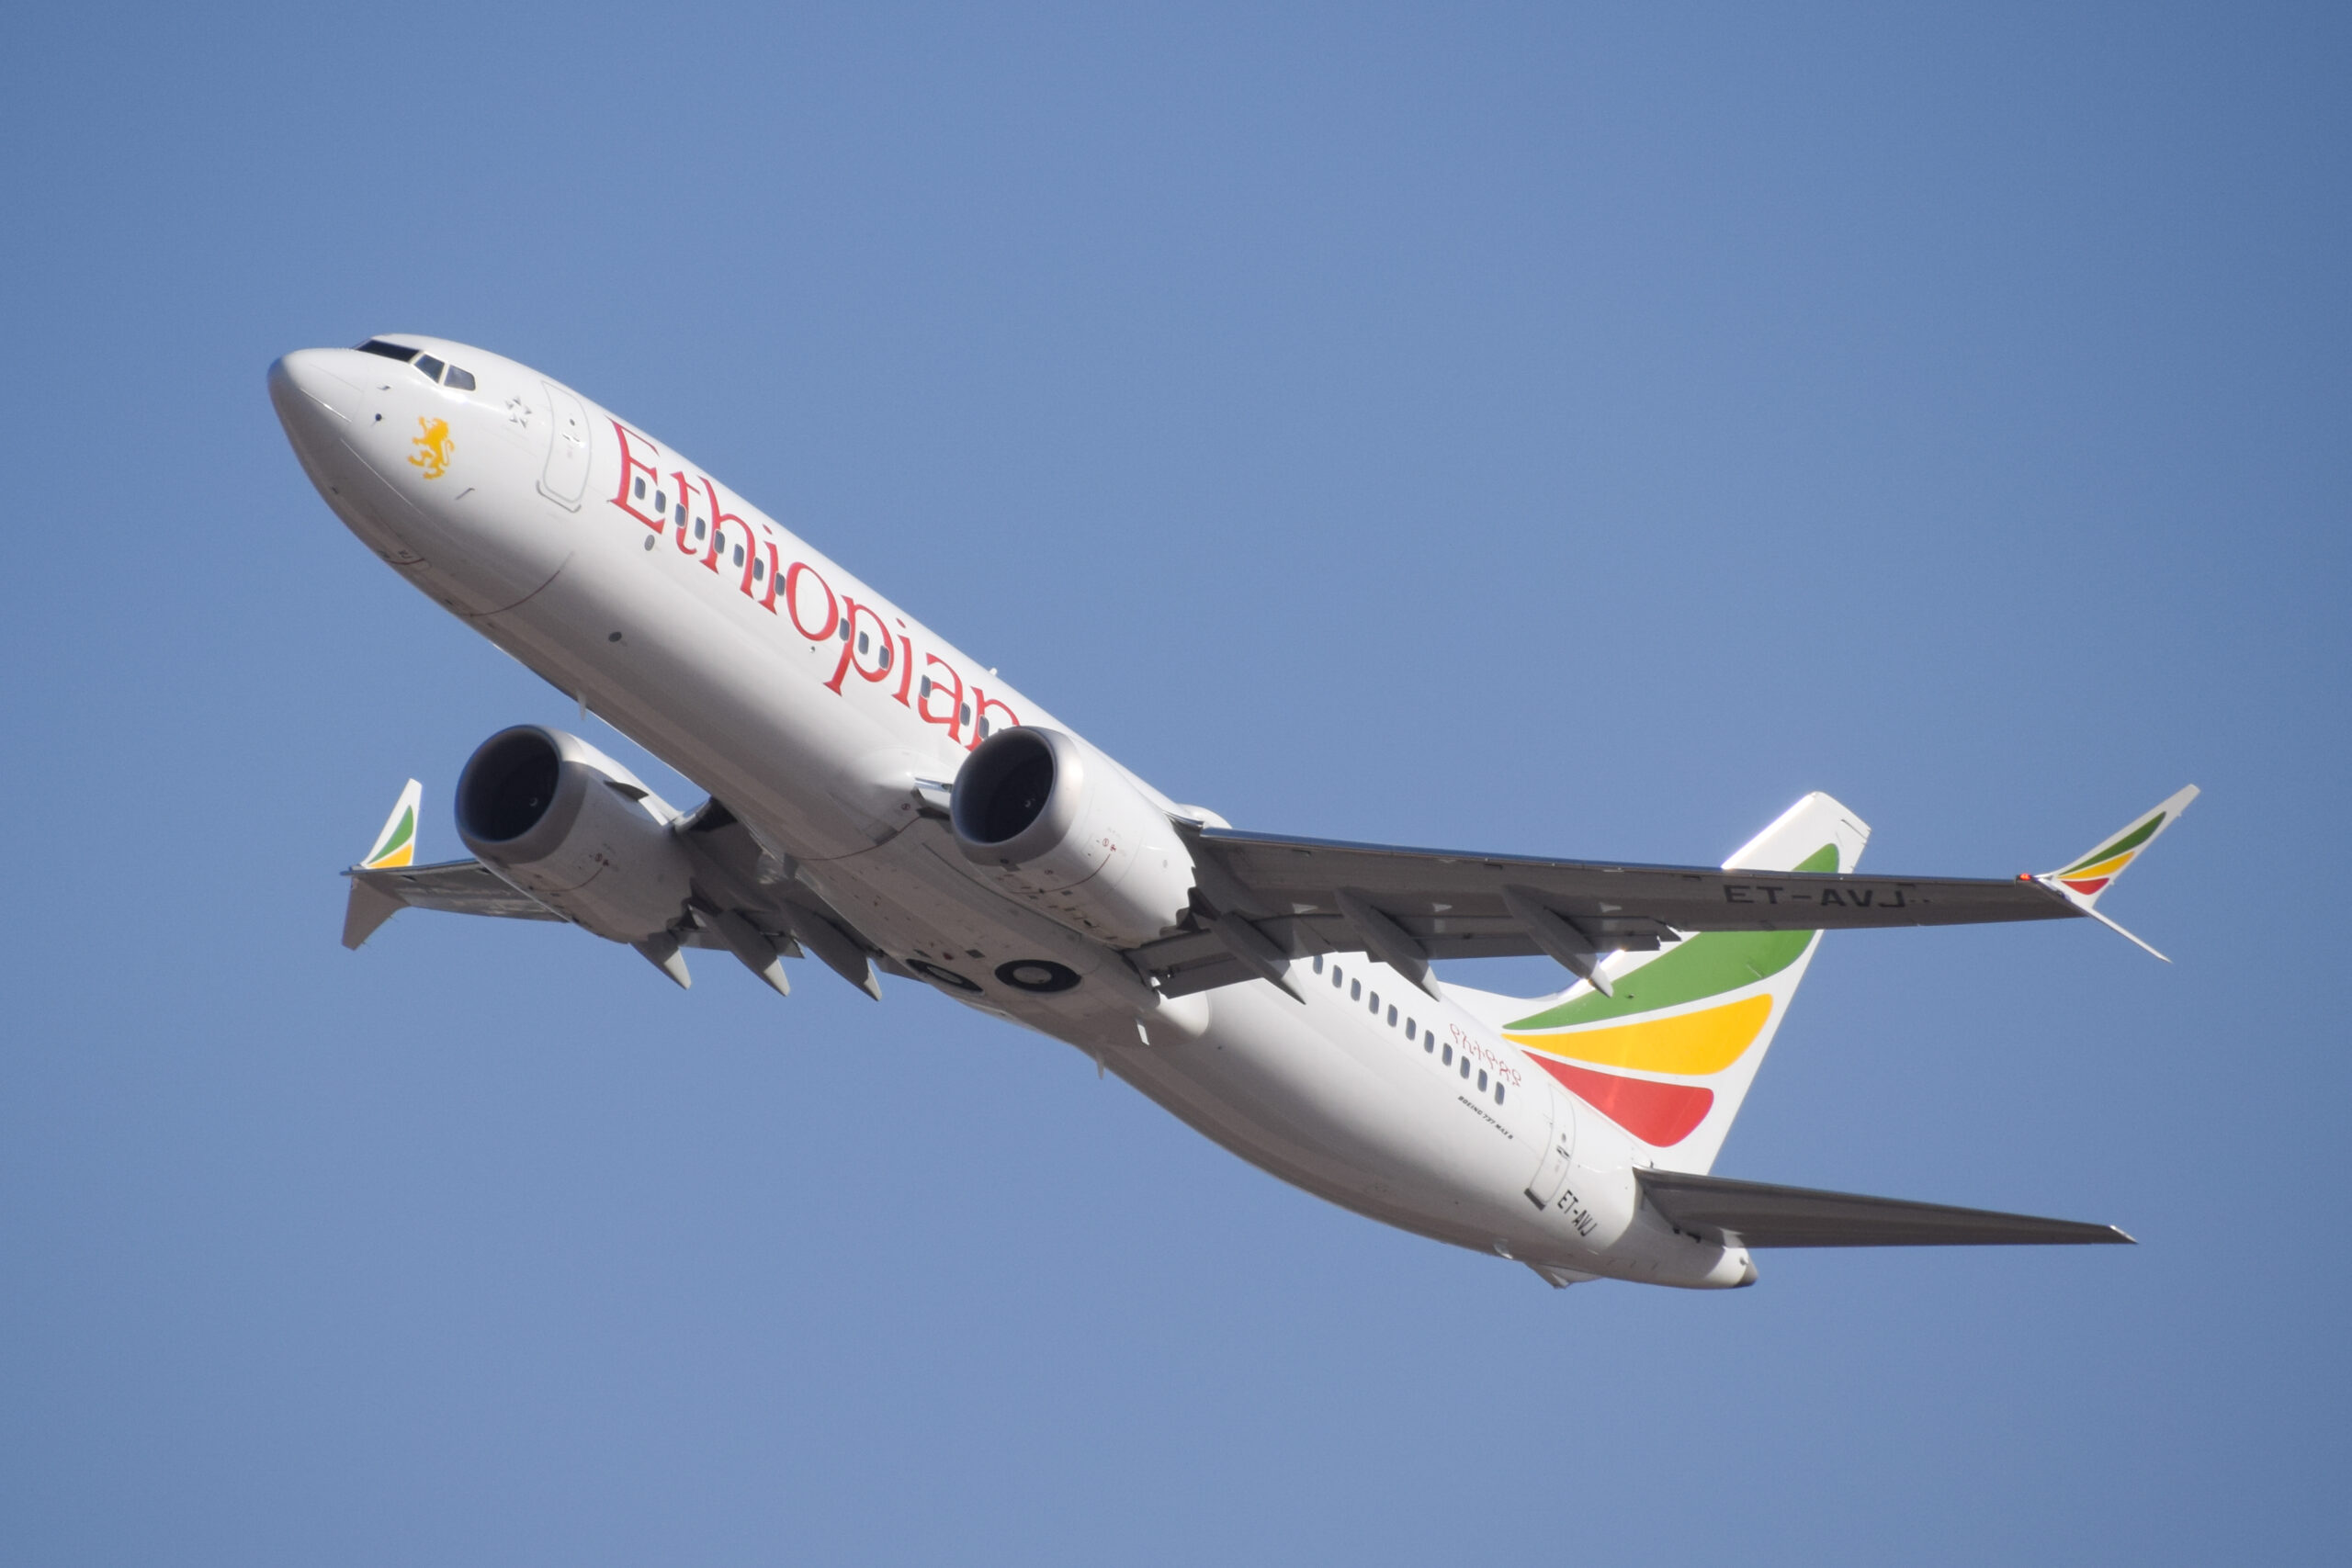 A now-destroyed Boeing 737 MAX belonging to Ethiopian Airlines